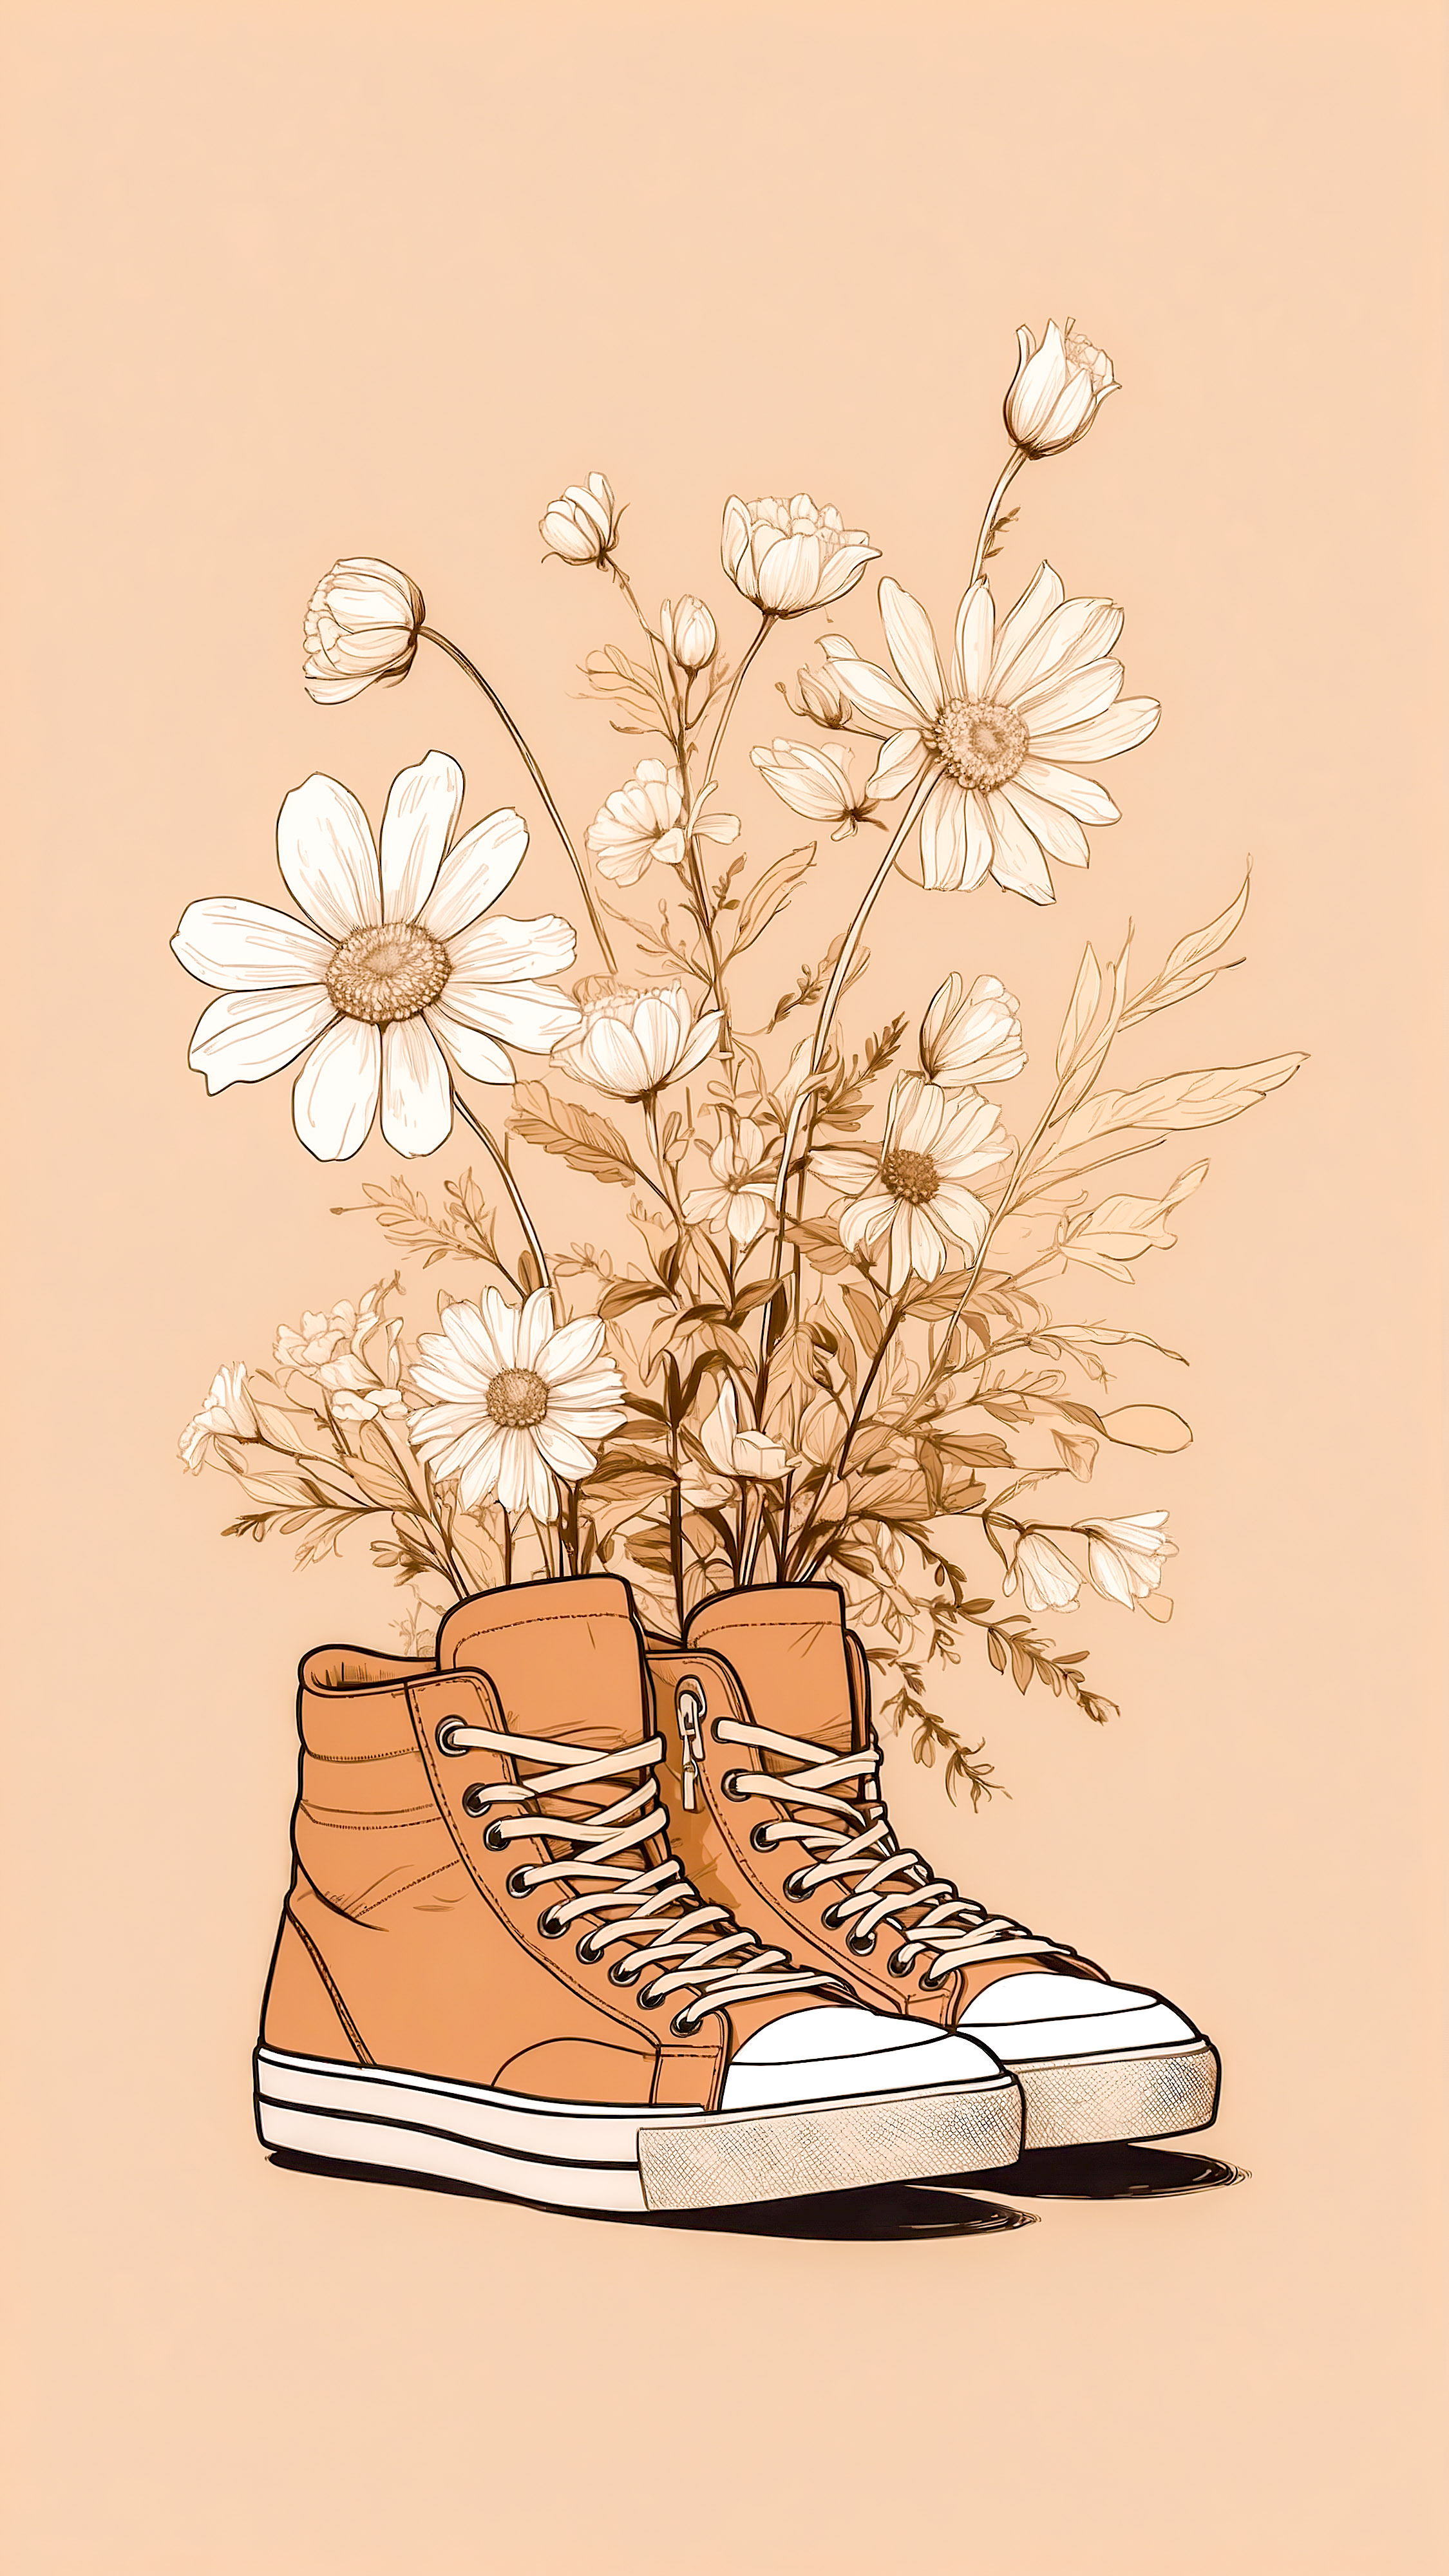 Bring the beauty of simplicity to your iPhone with simple wallpapers featuring a pair of brown and white sneakers with flowers sprouting from them against a beige background.